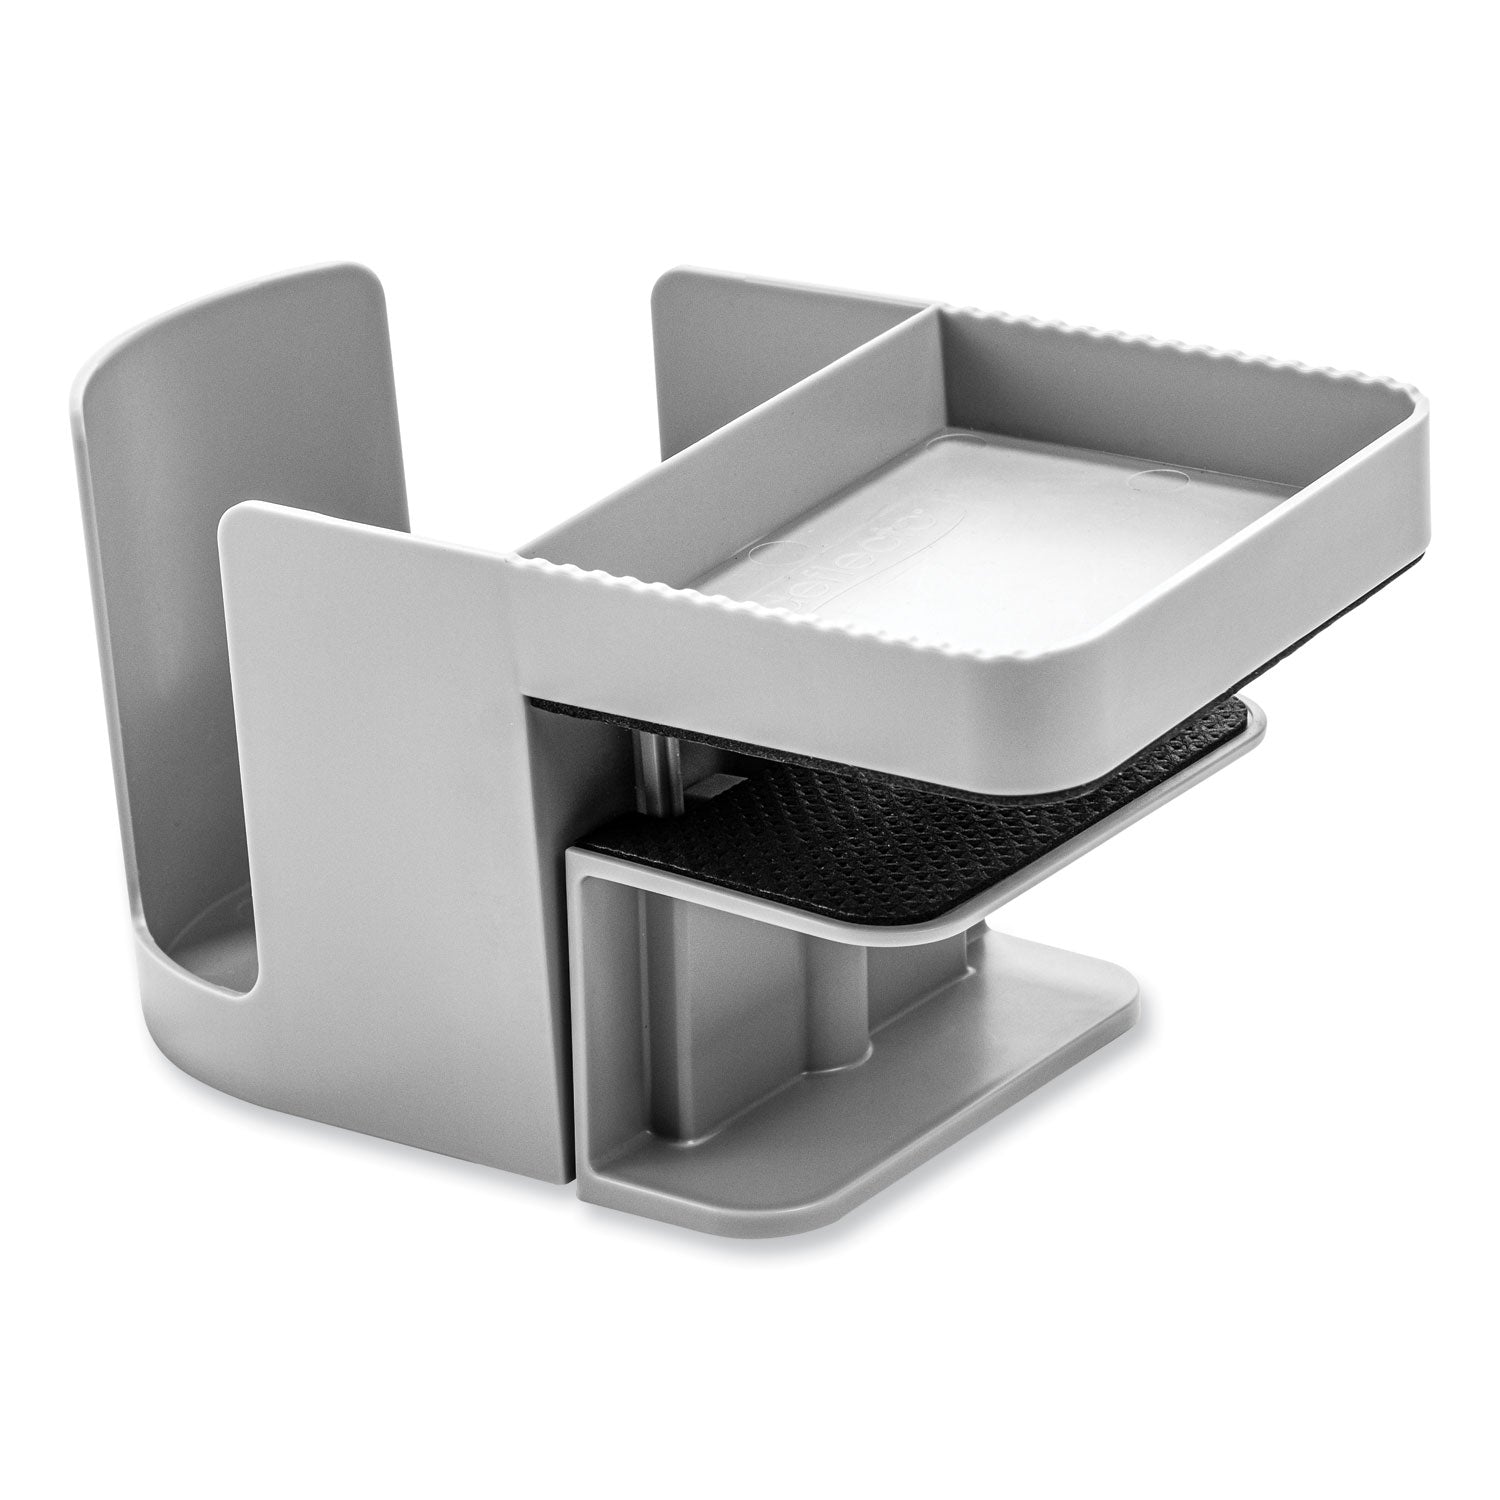 standing-desk-cup-holder-organizer-two-sections-394-x-704-x-354-gray_def400000 - 8